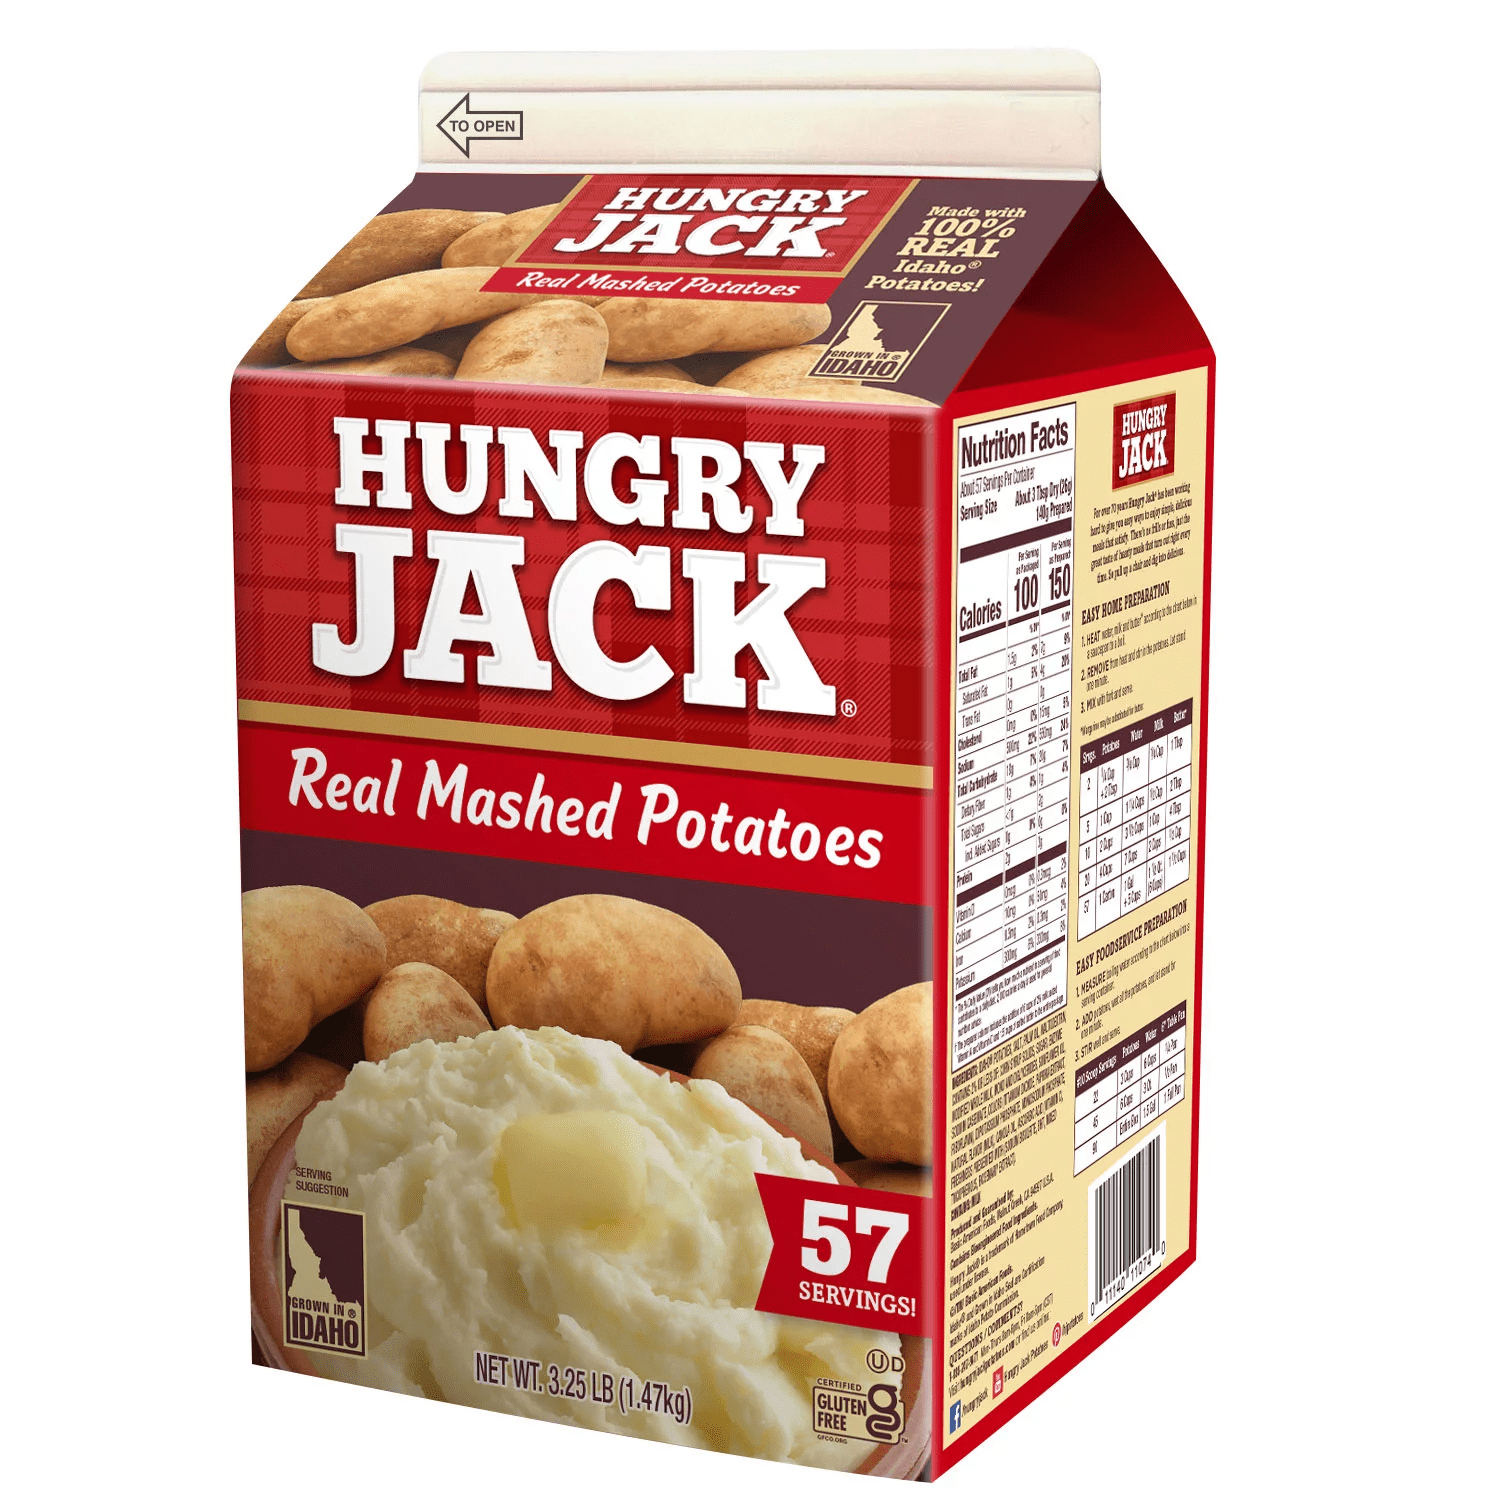 Hungry Jack 100 Real Mashed Potatoes, 57 Servings, Gluten Free